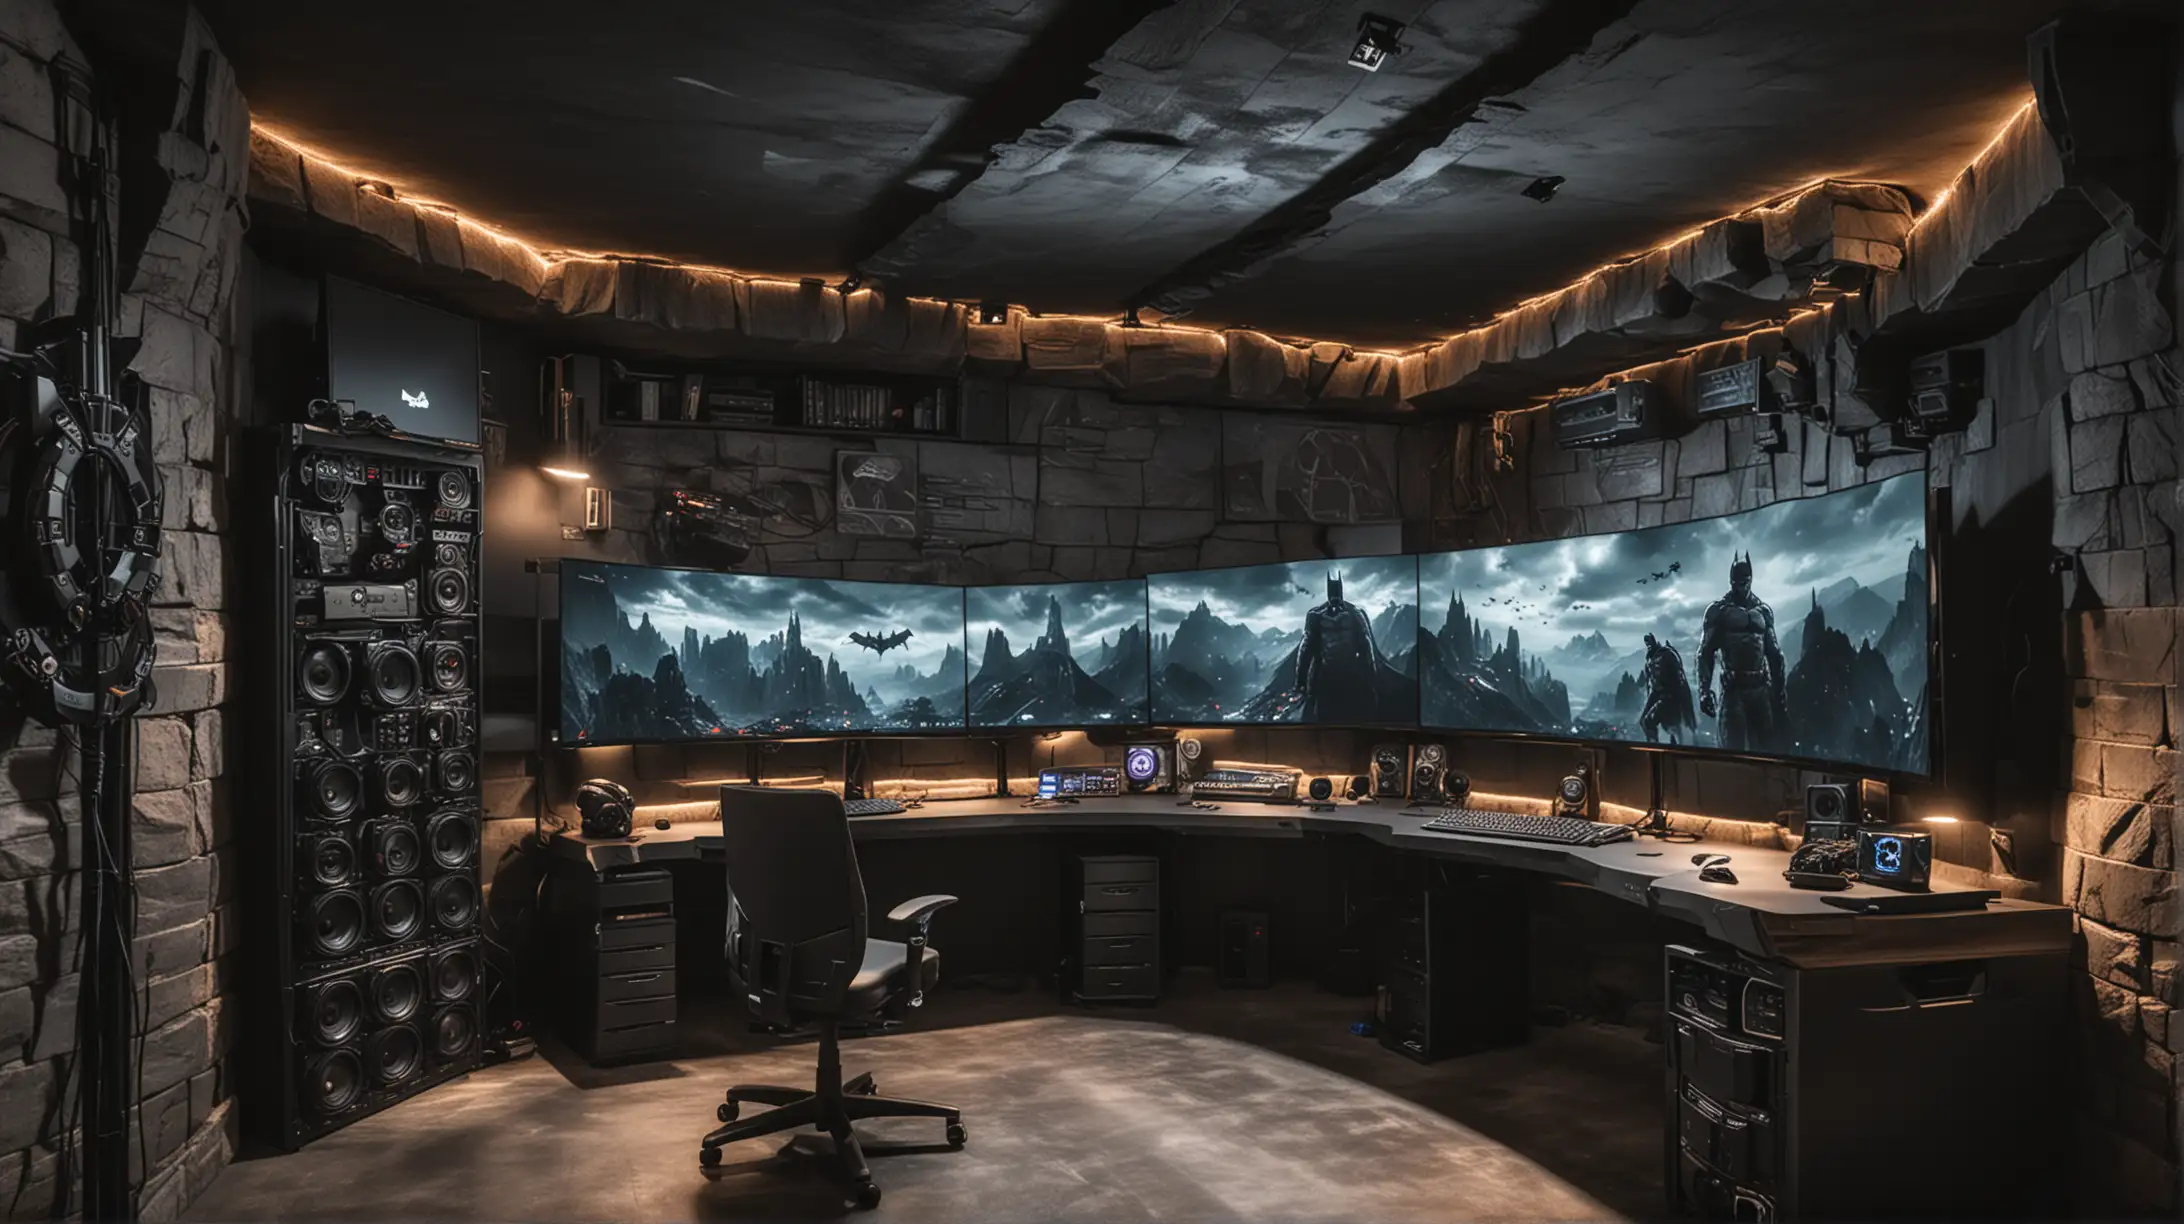 The most badass Batcave-like PC gaming room with one ultrawide PC monitor and two vertical monitors. A home cinema corner and clean Batcave walls.